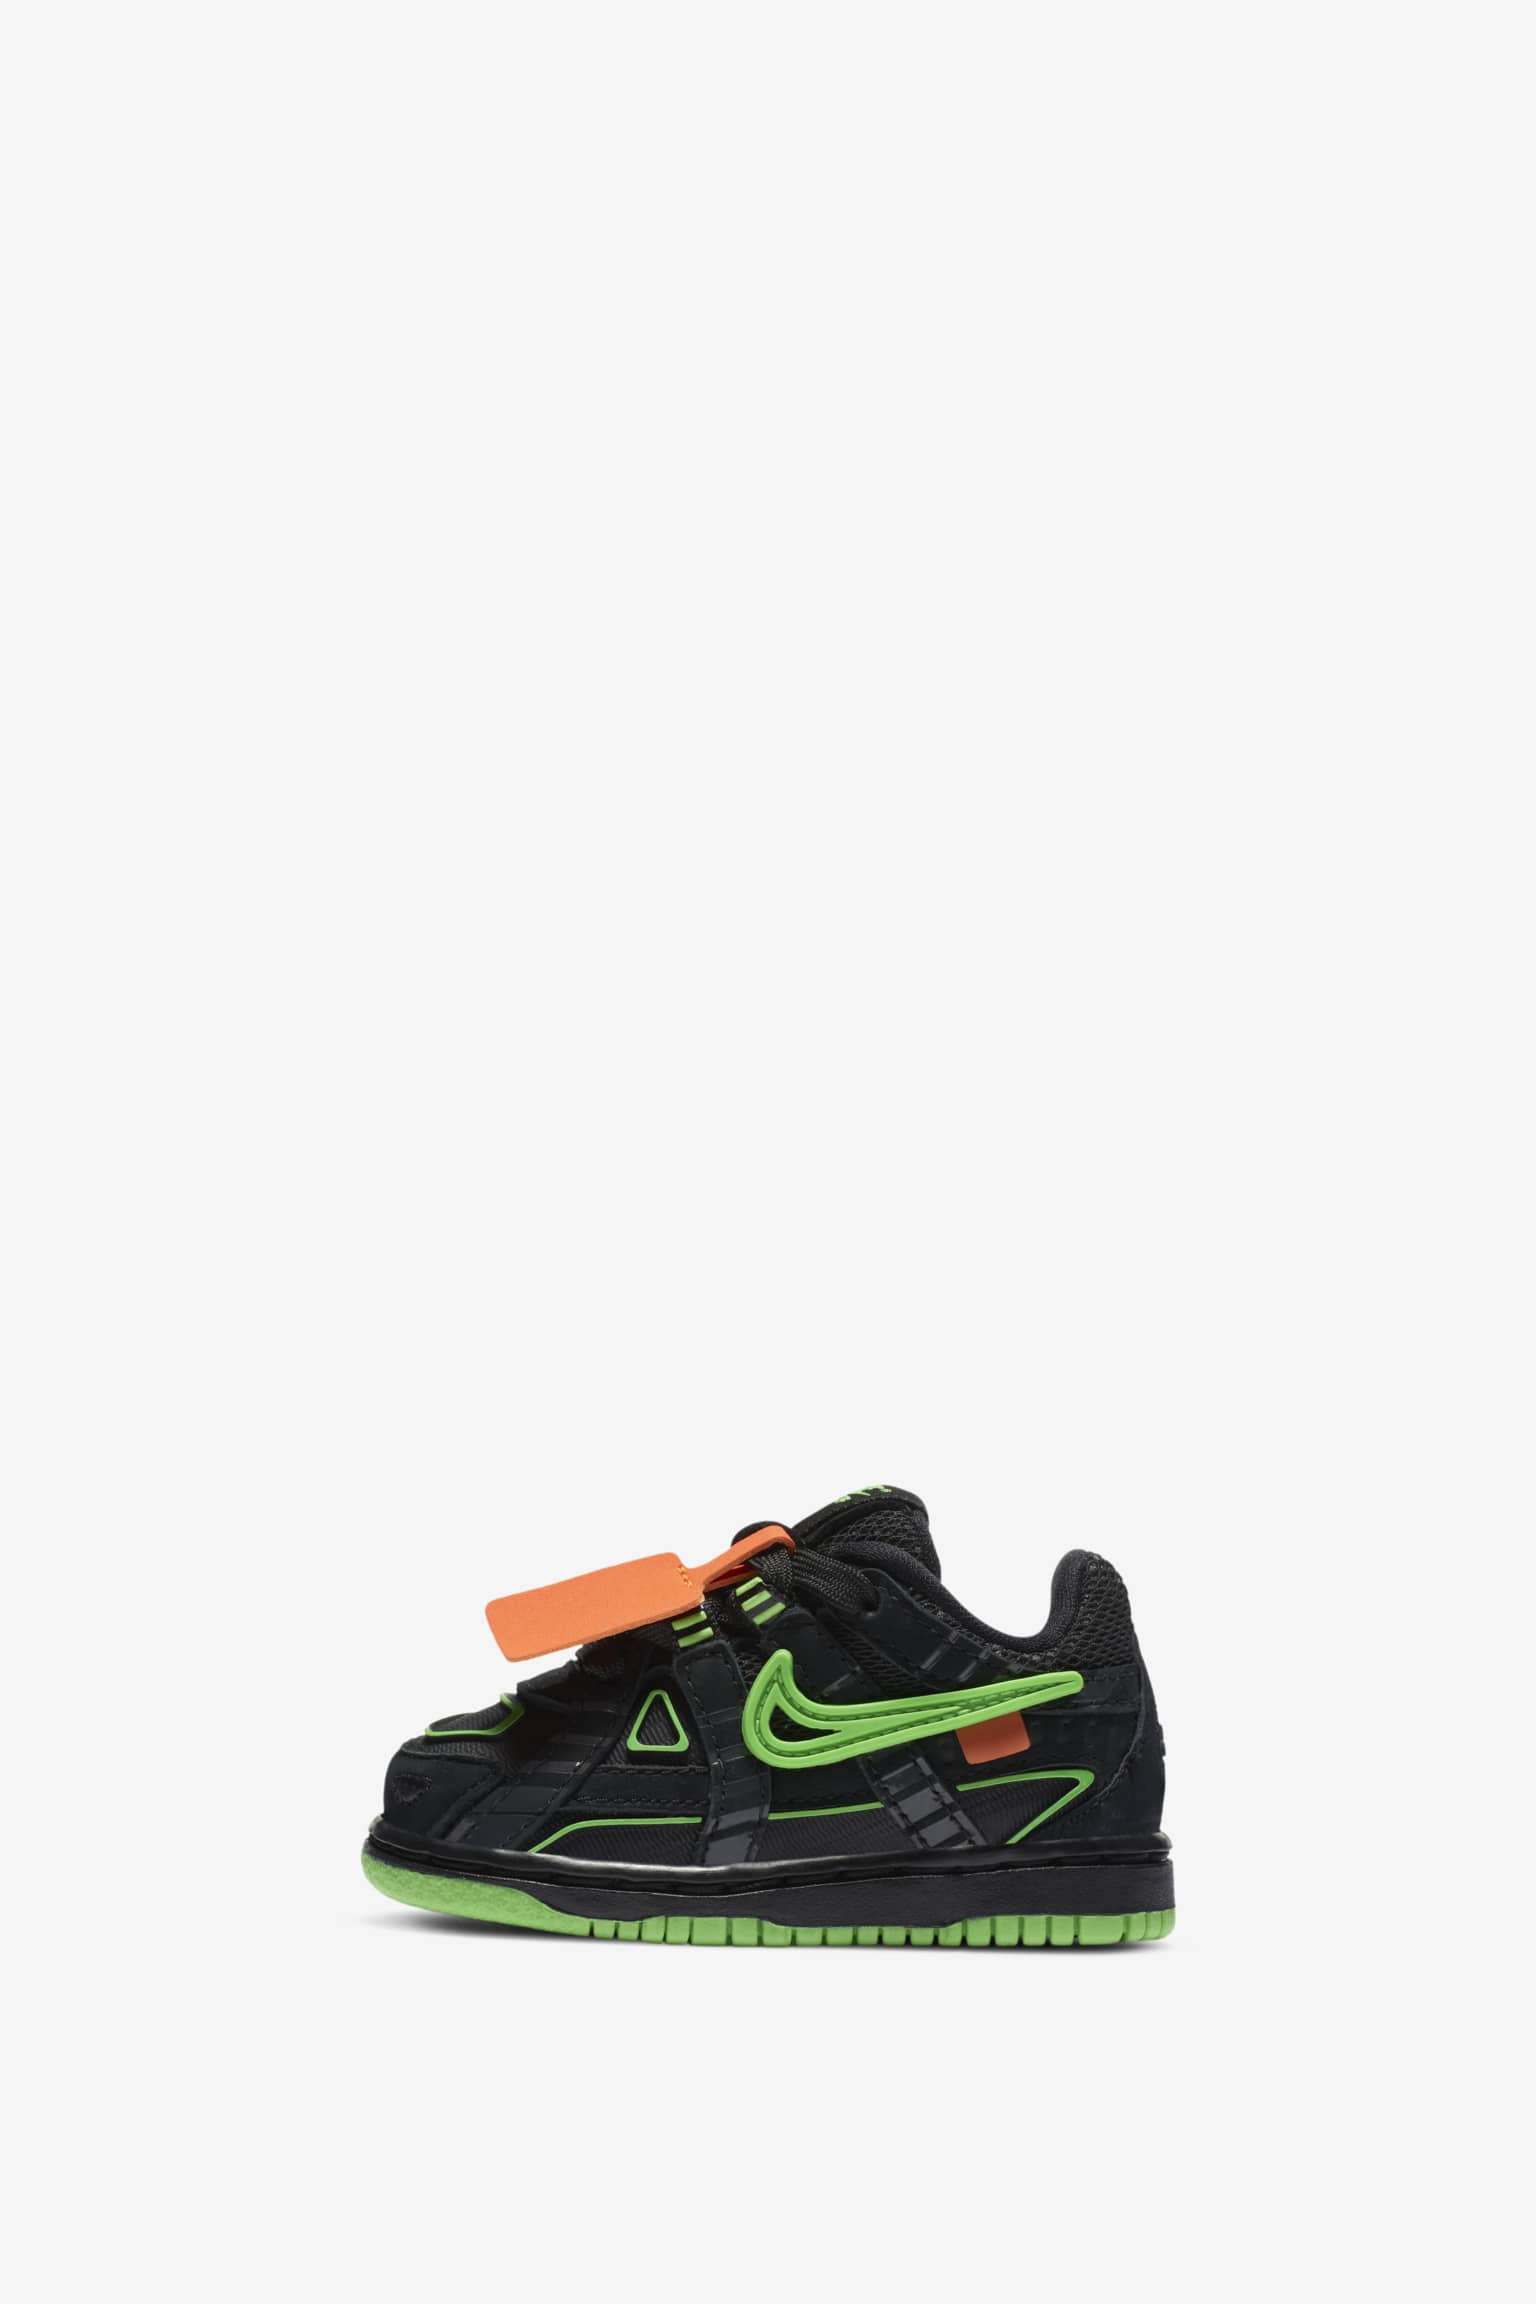 Rubber Dunk x Off-White™️ 'Green Strike' Release Date. Nike SNKRS